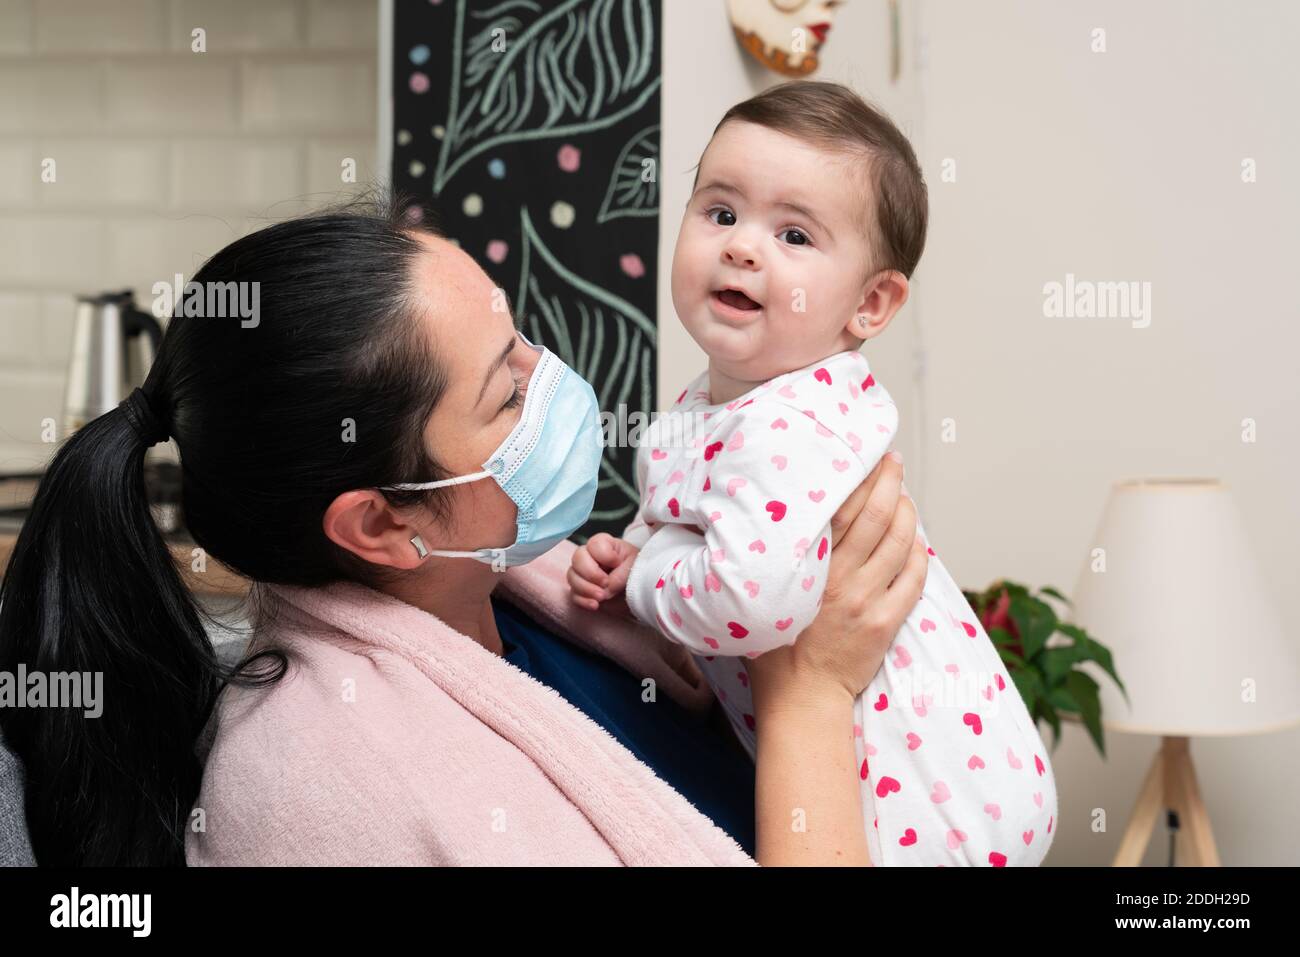 Adult woman model having sars flu covid19 illness symptoms covering nose and mouth using medical or surgical mask playing with baby girl daughter as p Stock Photo